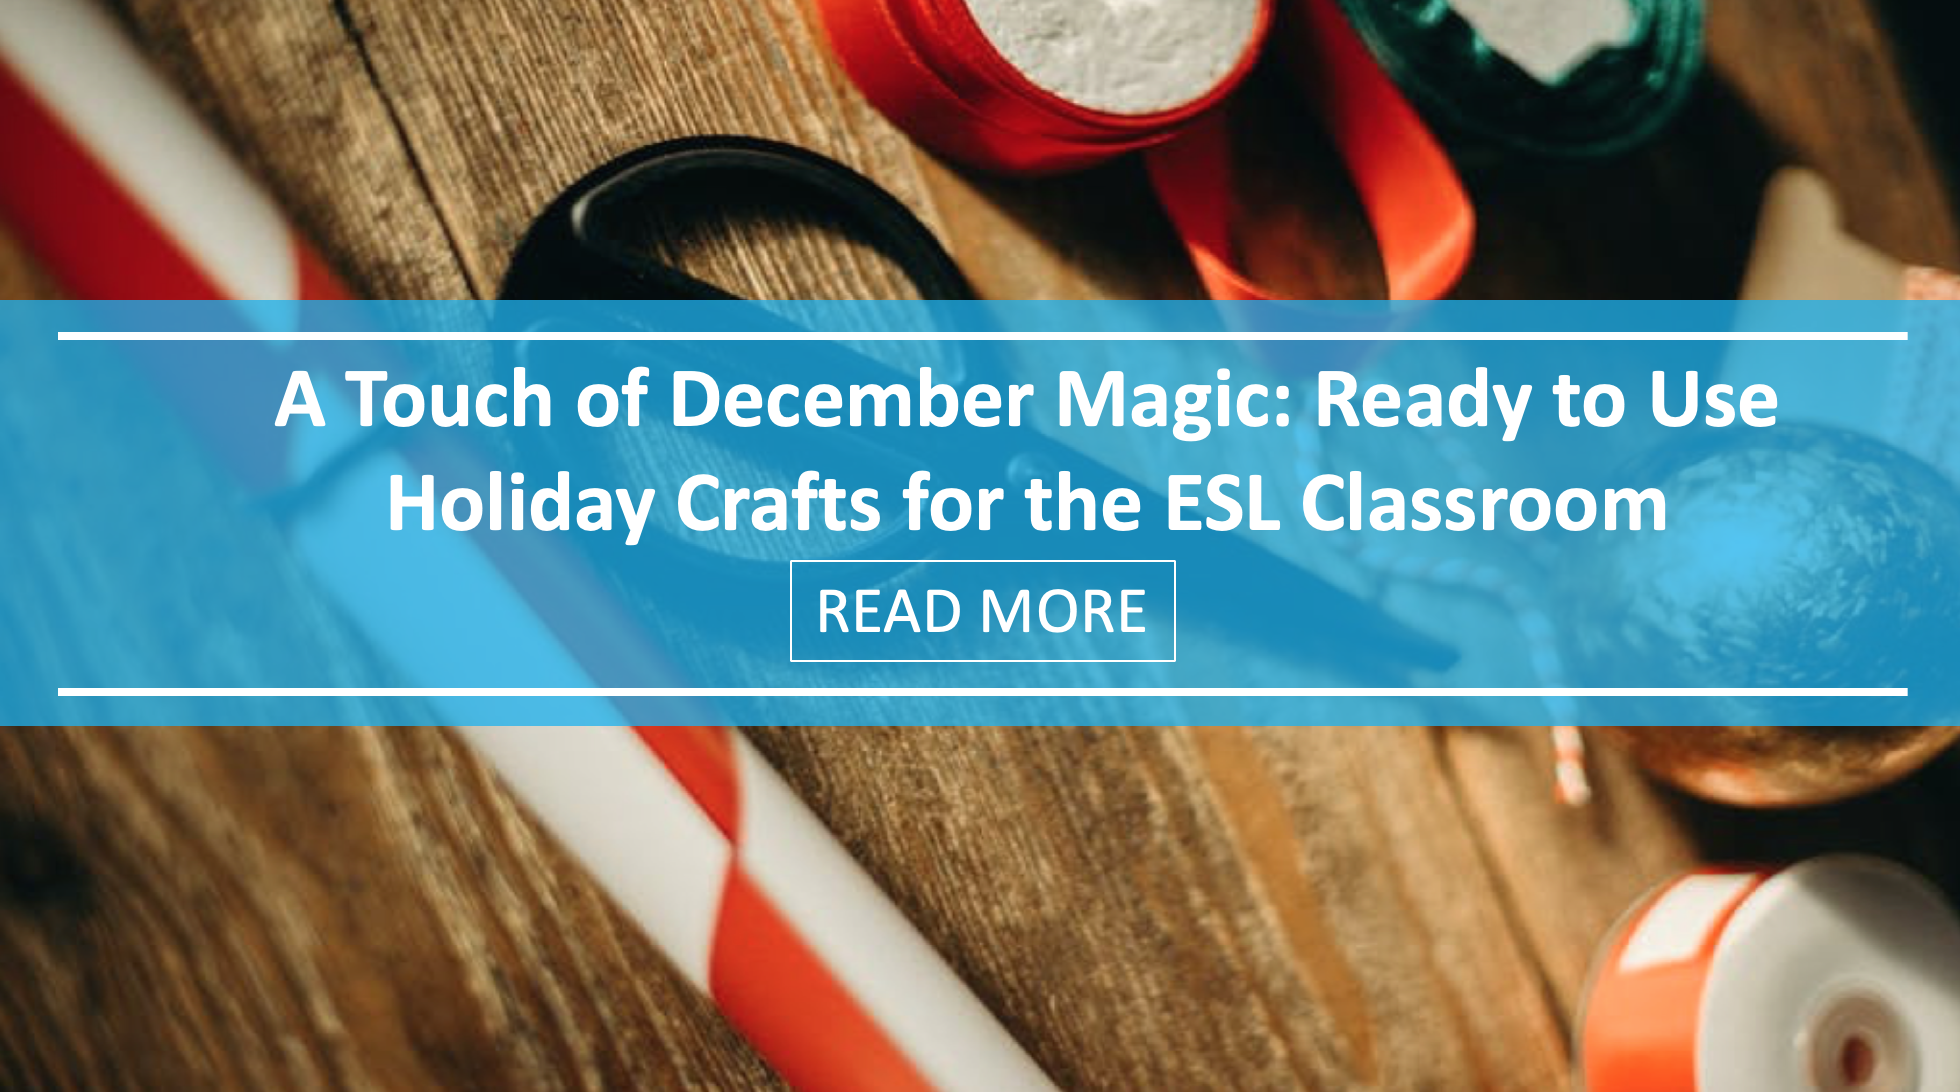 A Touch of December Magic: Ready To Use Holiday Crafts for the ESL Classroom [Part One]